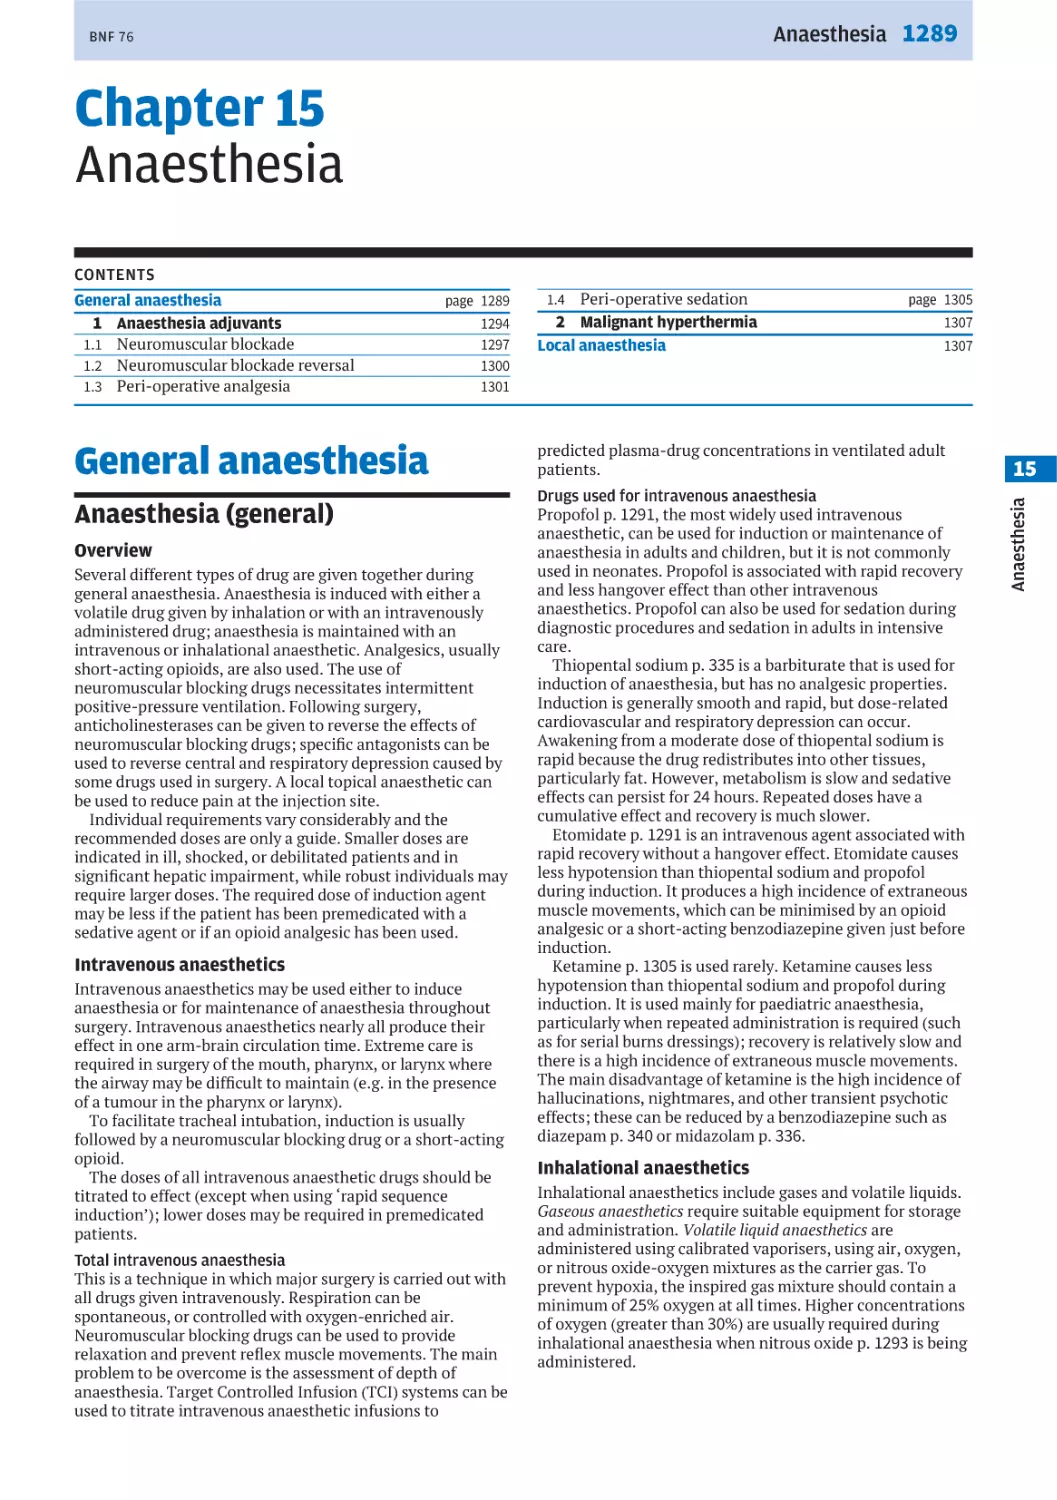 Chapter 15 Anaesthesia
General anaesthesia